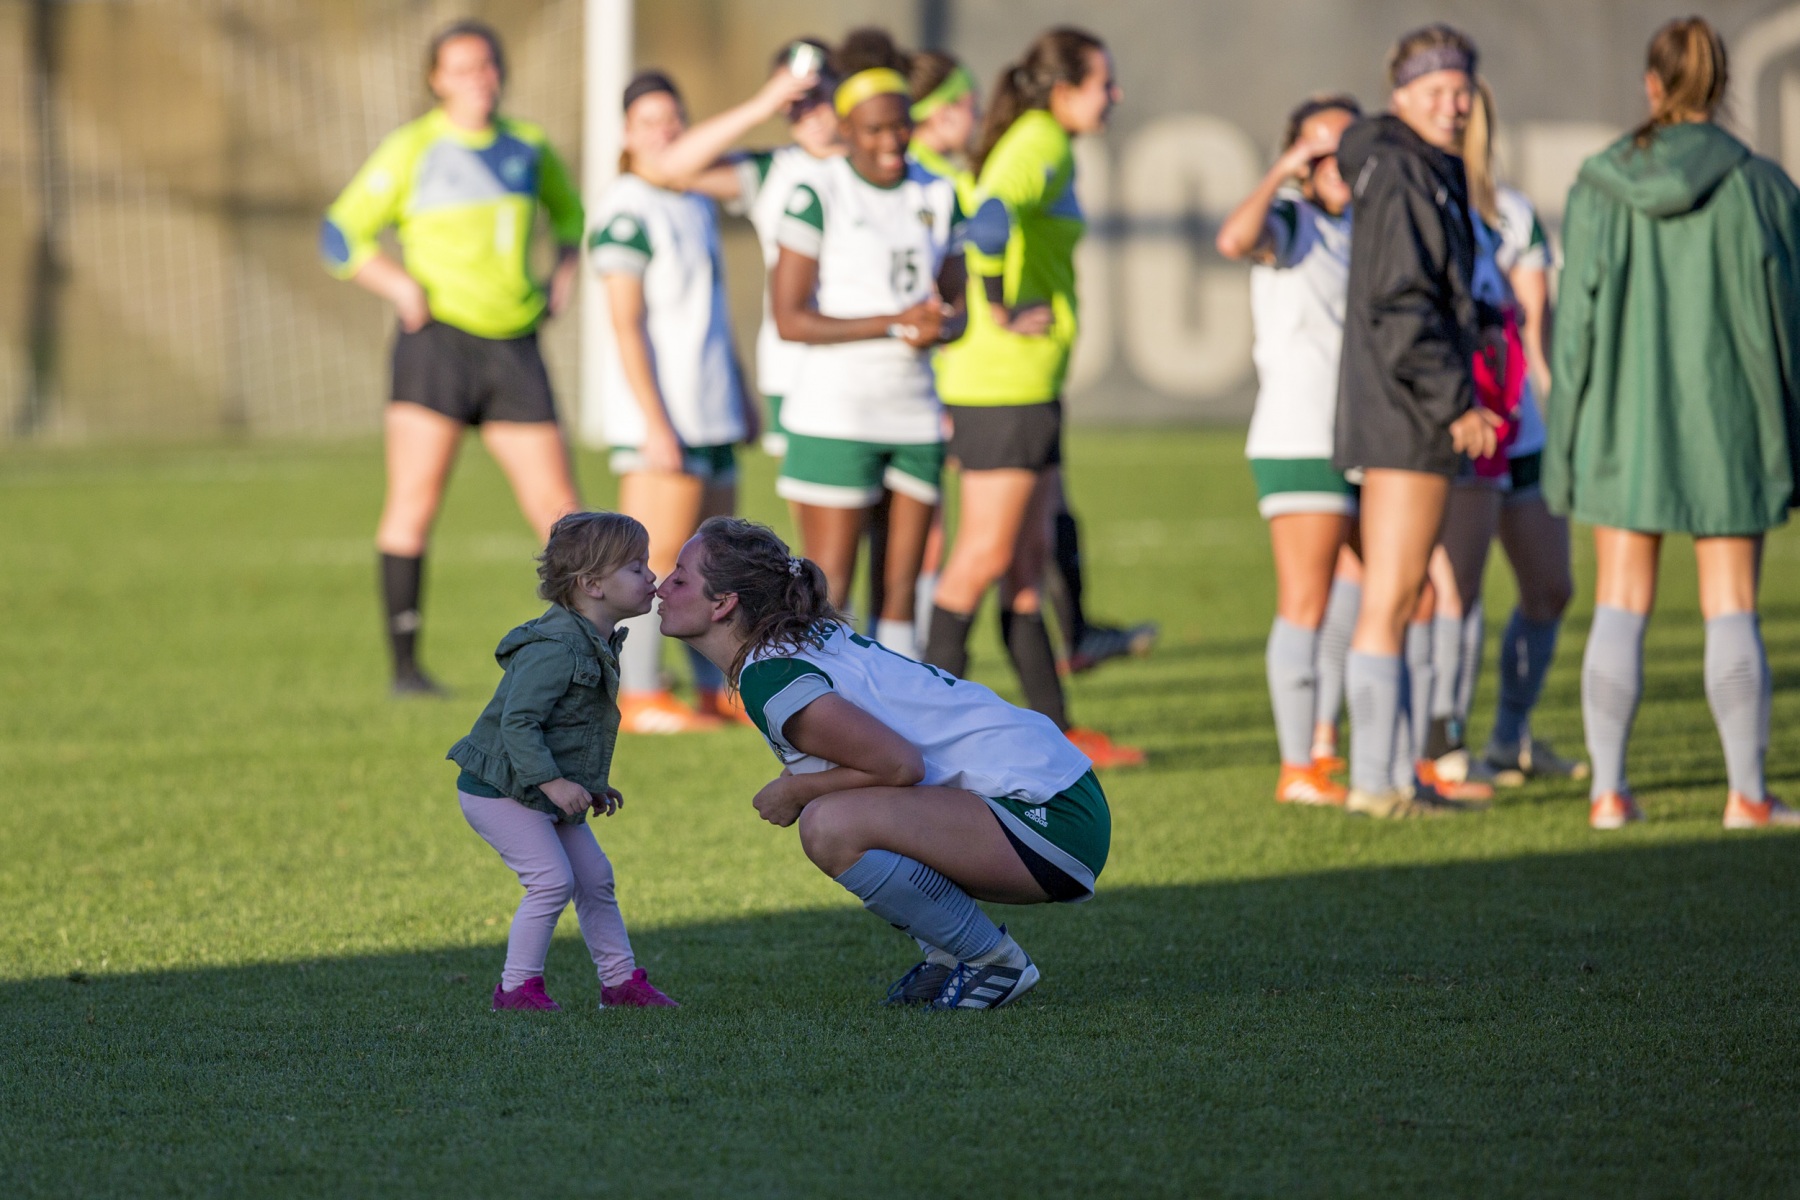 Ohio University midfielder Jenni Santacaterina, of Geneva, Ill., celebrates with her niece, Audrey Manny, 2, and her mother, Jackie Manny, after the Ohio University Womens Soccer game against Central Michigan University on Friday, October 18, 2019. Ohio University won the game 2-1.